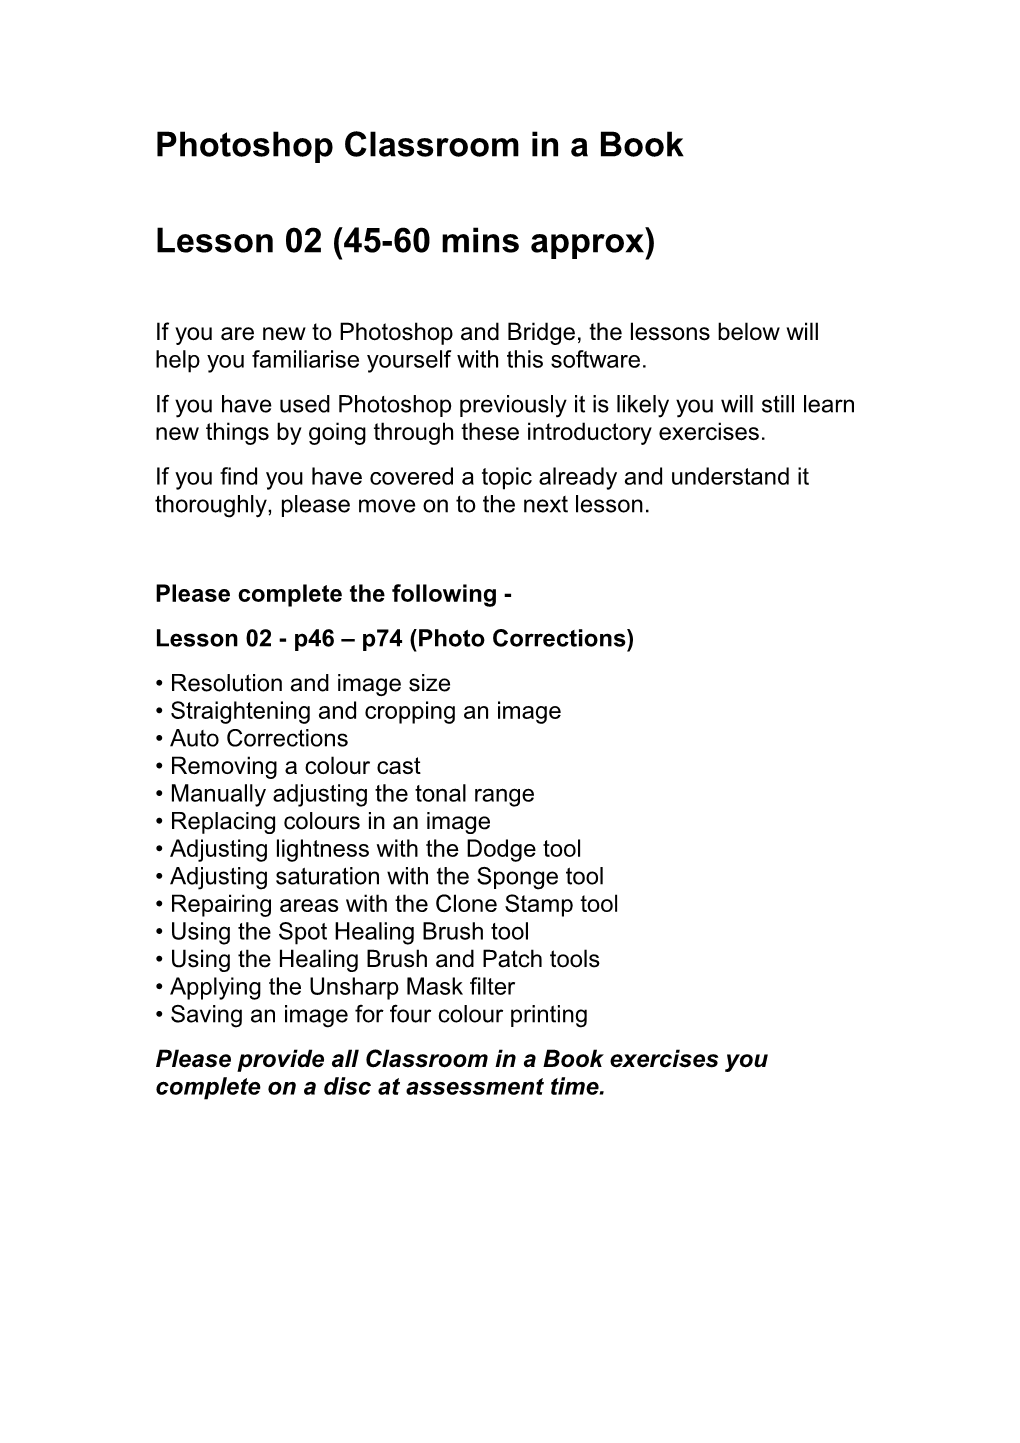 Lesson 02 (45-60 Mins Approx)